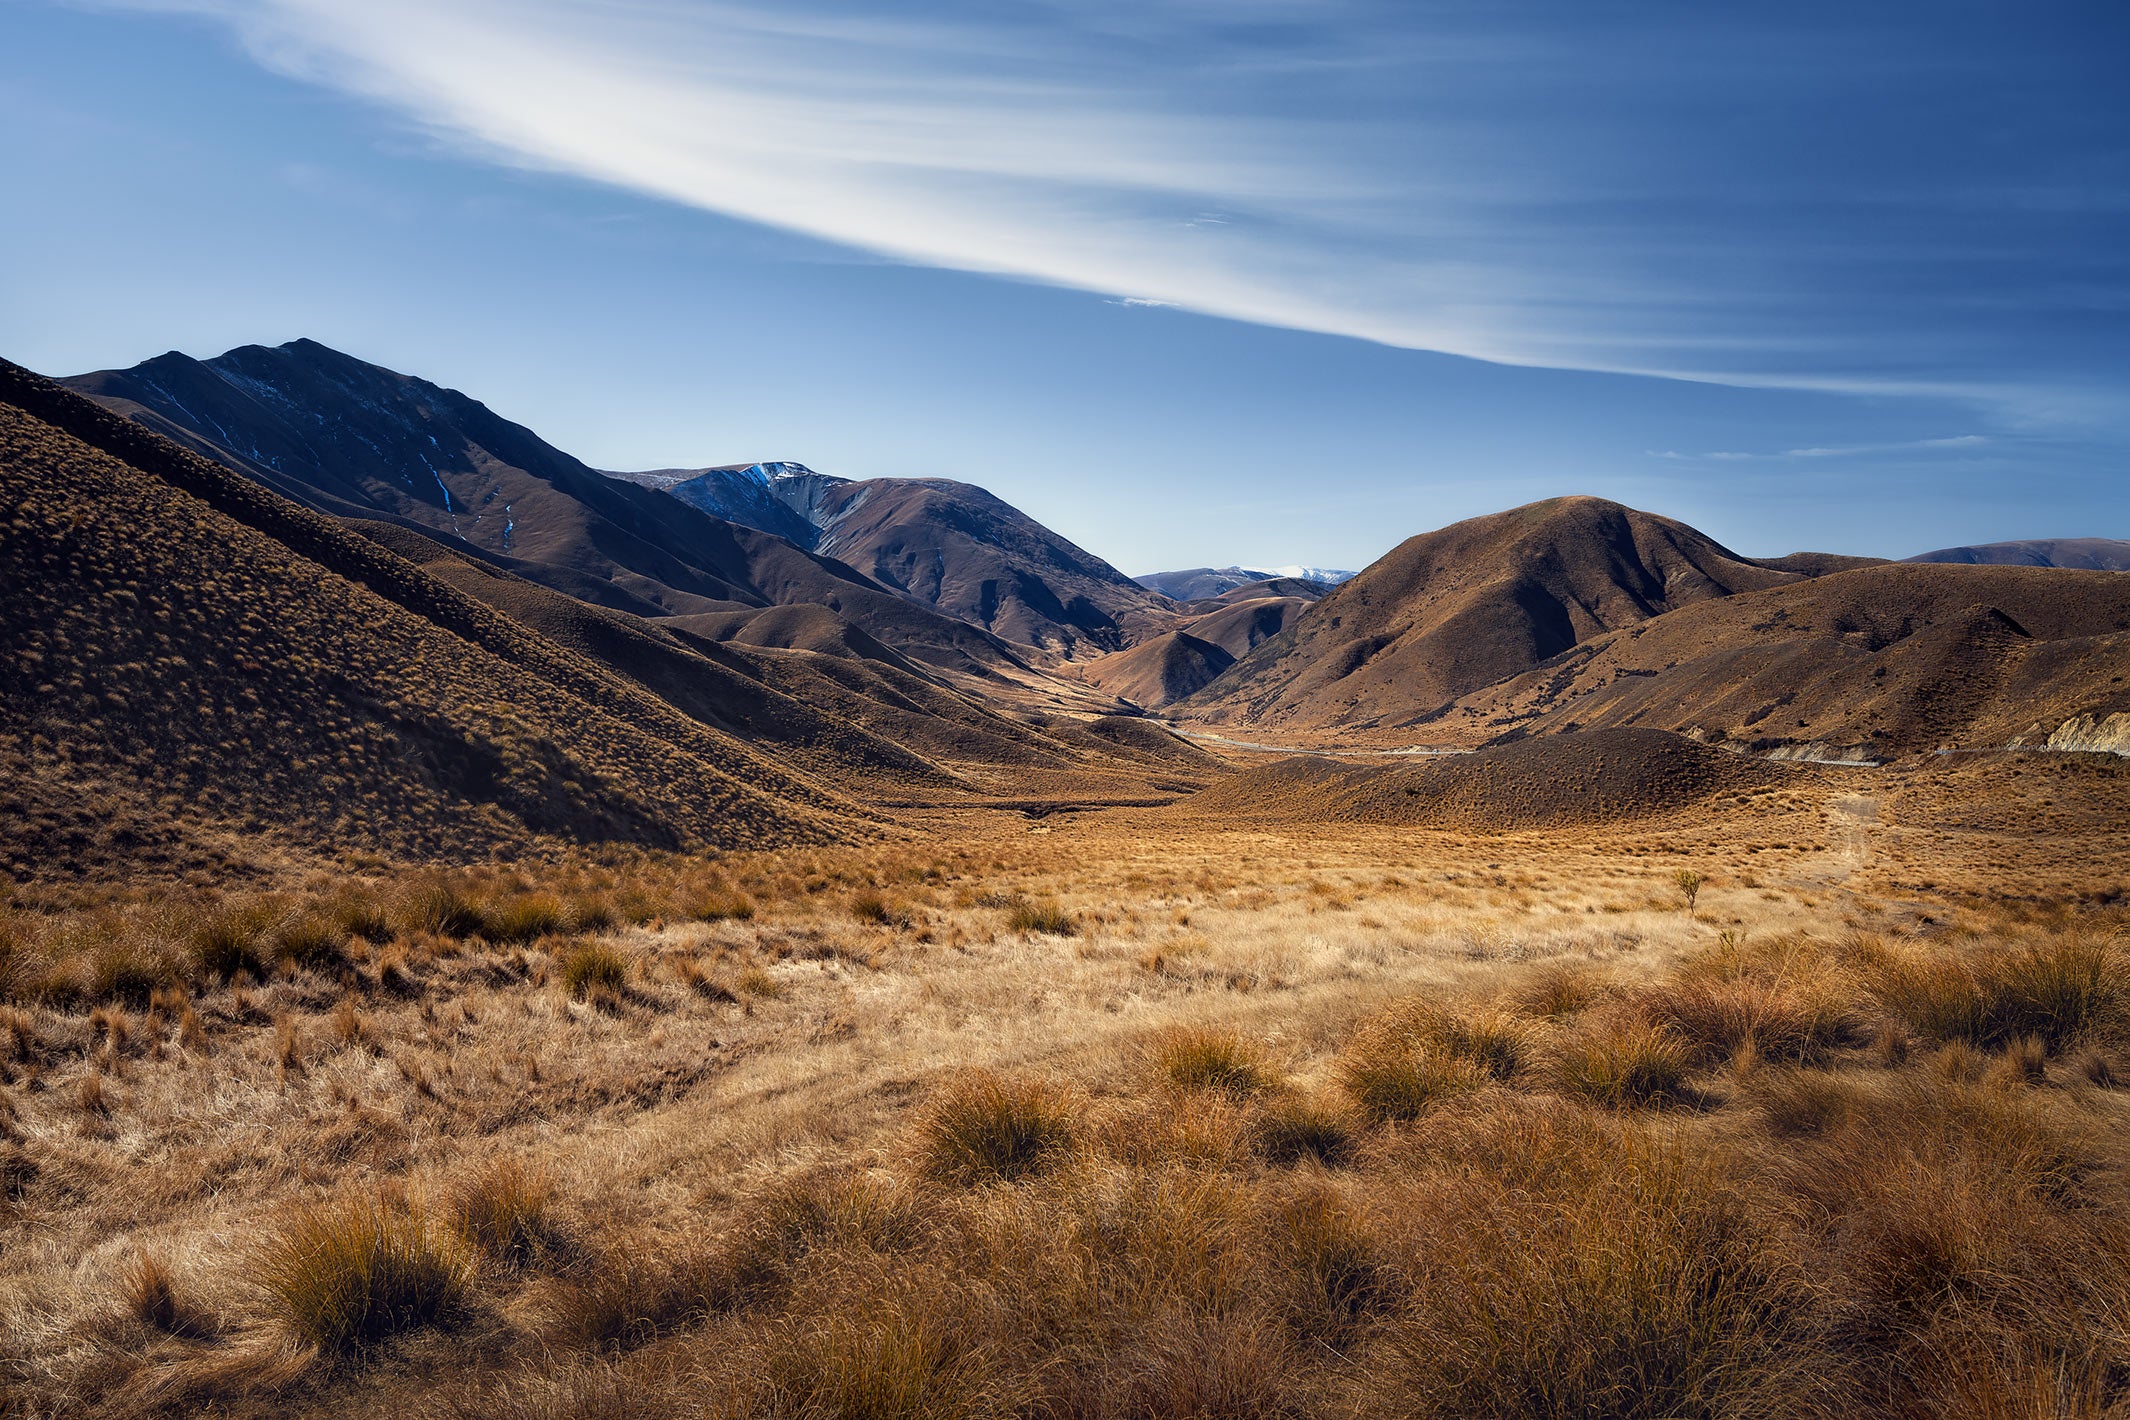 Landscape photo of mountain pass with blue skies above, and golden tussock in the foreground.